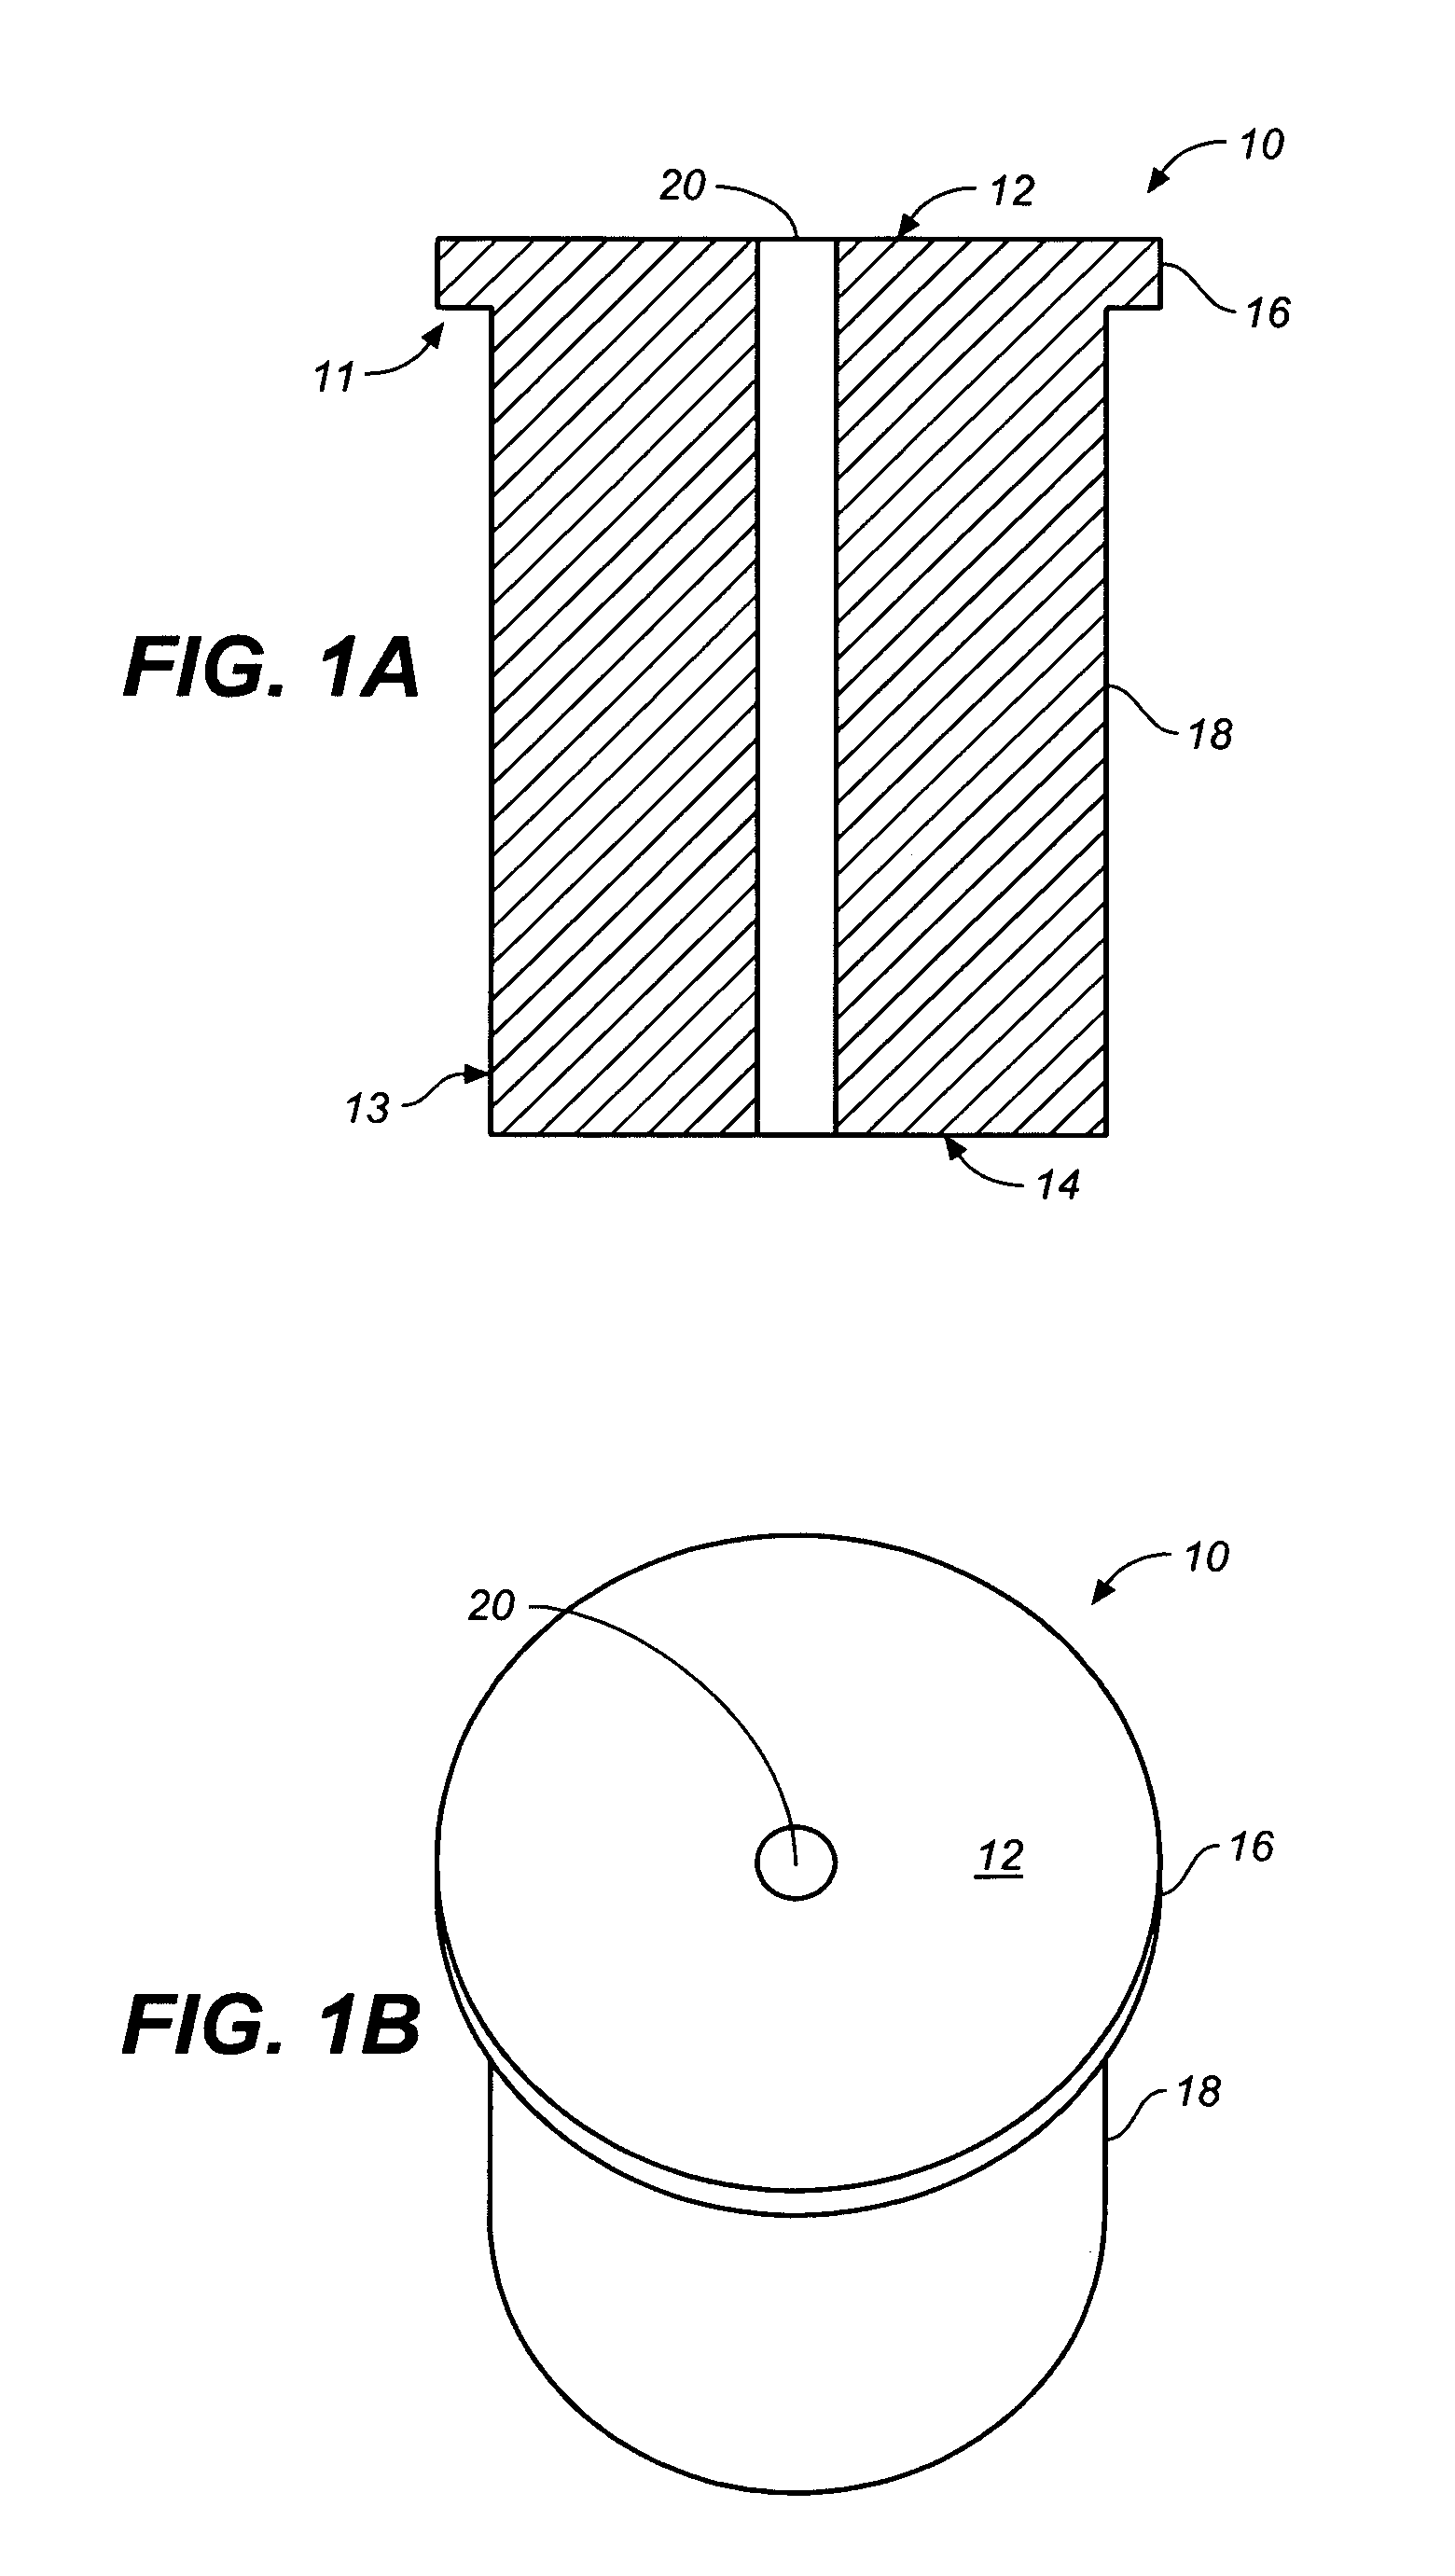 Device and method for allograft and tissue engineered osteochondral graft surface matching, preparation, and implantation